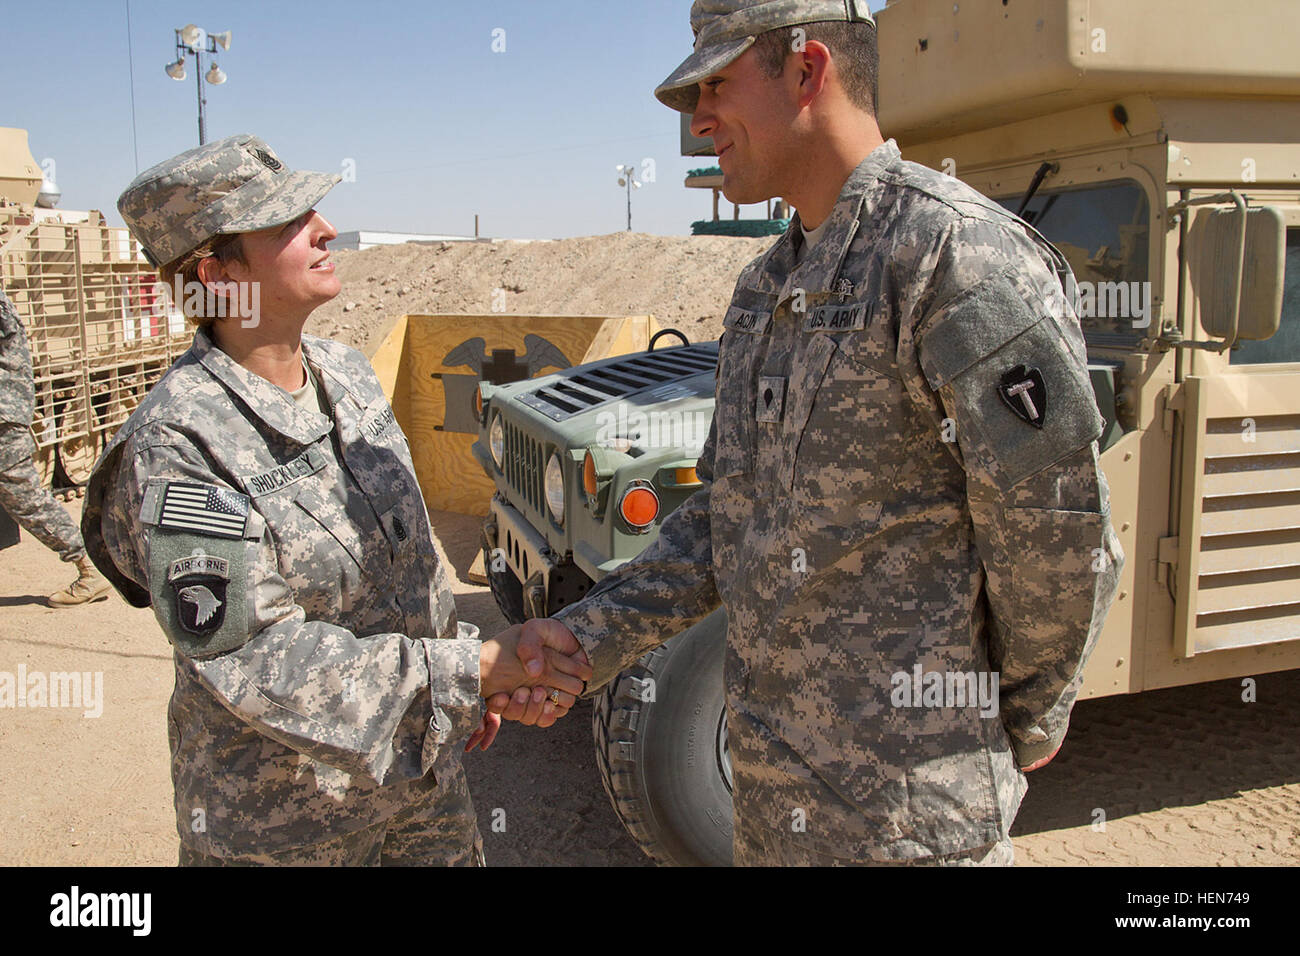 Spc. Wesley Acuna is congratulated by 36th Combat Aviation Brigade Command Sgt. Maj. Elizabeth Shockley after he received the Expert Field Medical Badge during a ceremony at Camp Buehring in Kuwait.  Spec. Acuna is deployed to the Middle East in support of Operation Enduring Freedom. (U.S. Army photo by Sgt. Mark Scovell/Released) Texas soldier earns Expert Field Medical Badge 101613-A-AY590-031 Stock Photo